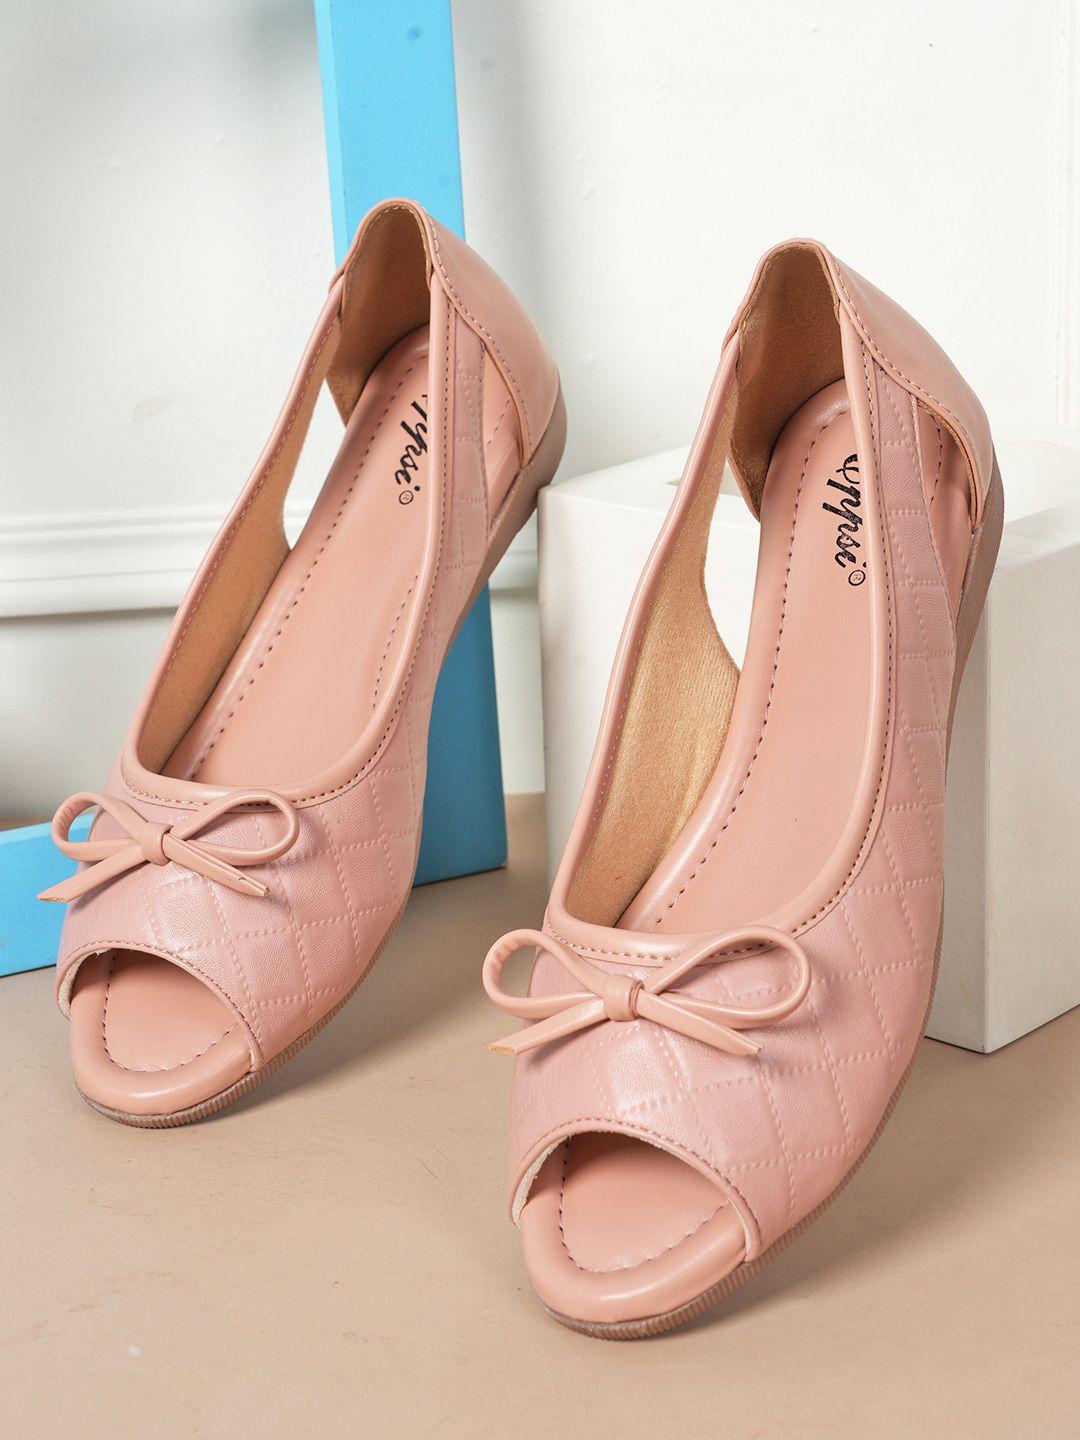 style shoes textured peep toe ballerinas with bows